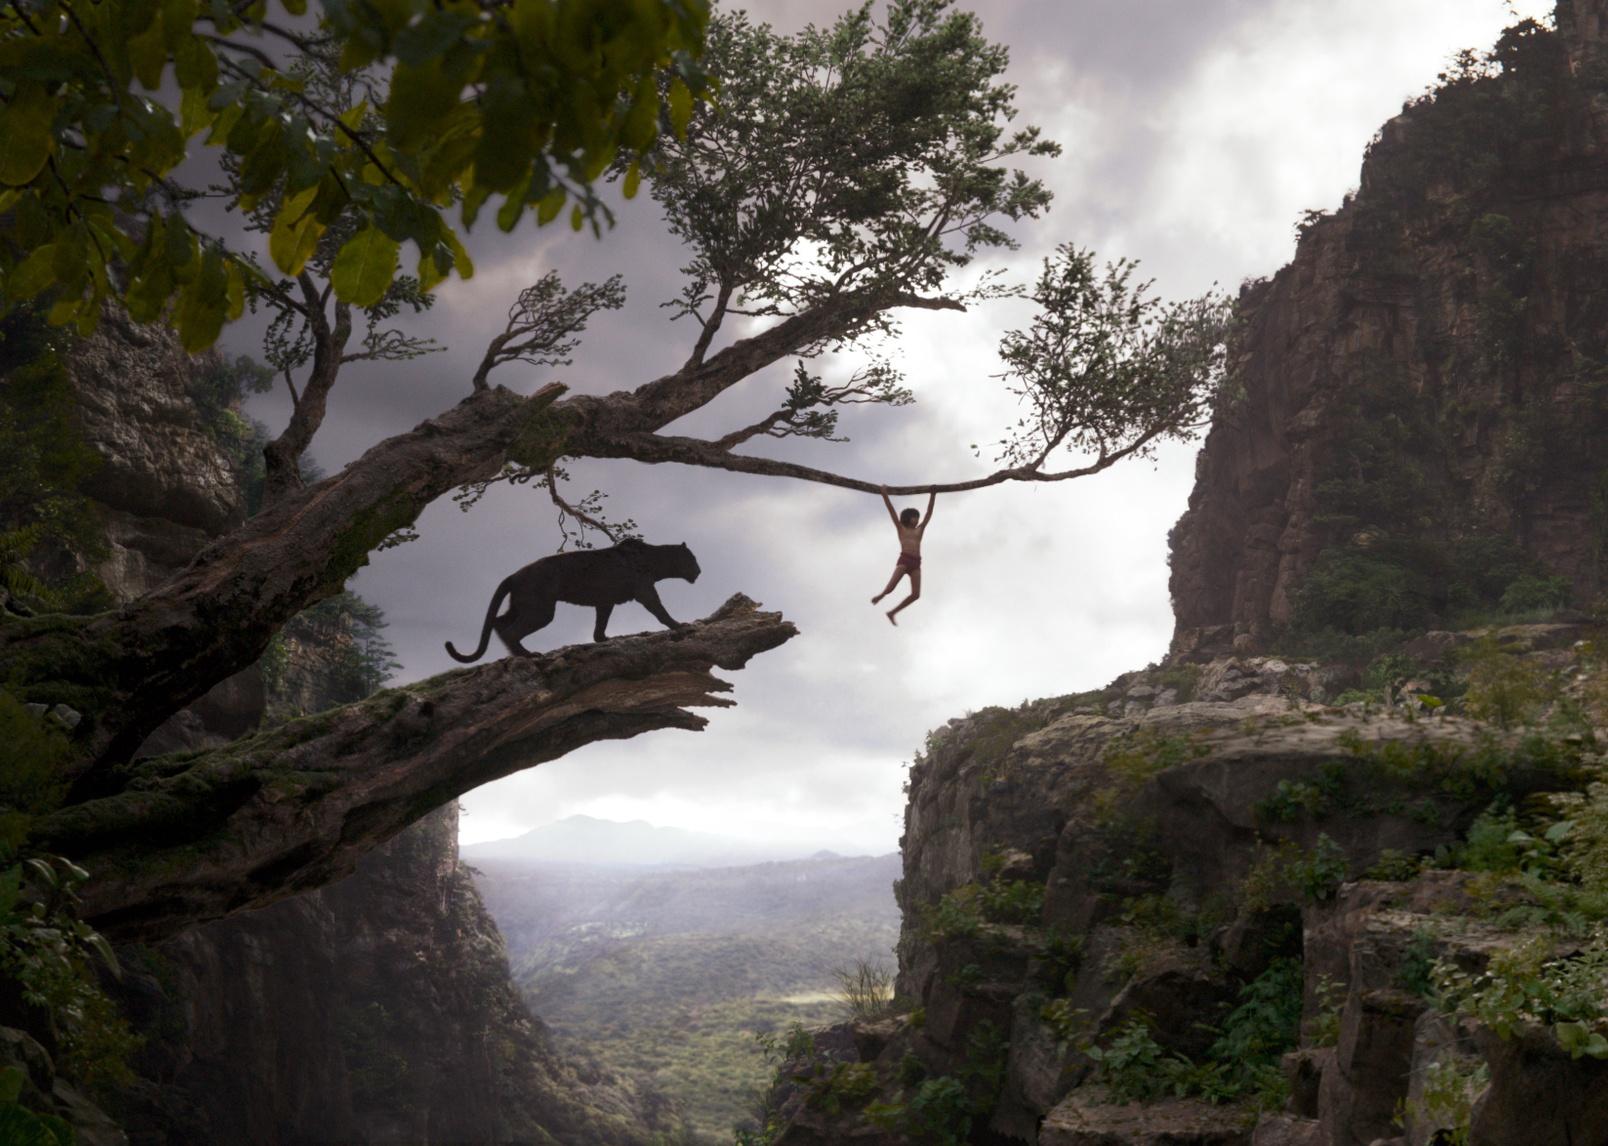 A far away view of Mowgli, a young boy, swinging across a canyon on a tree branch in front of a black panther named Bagheera.